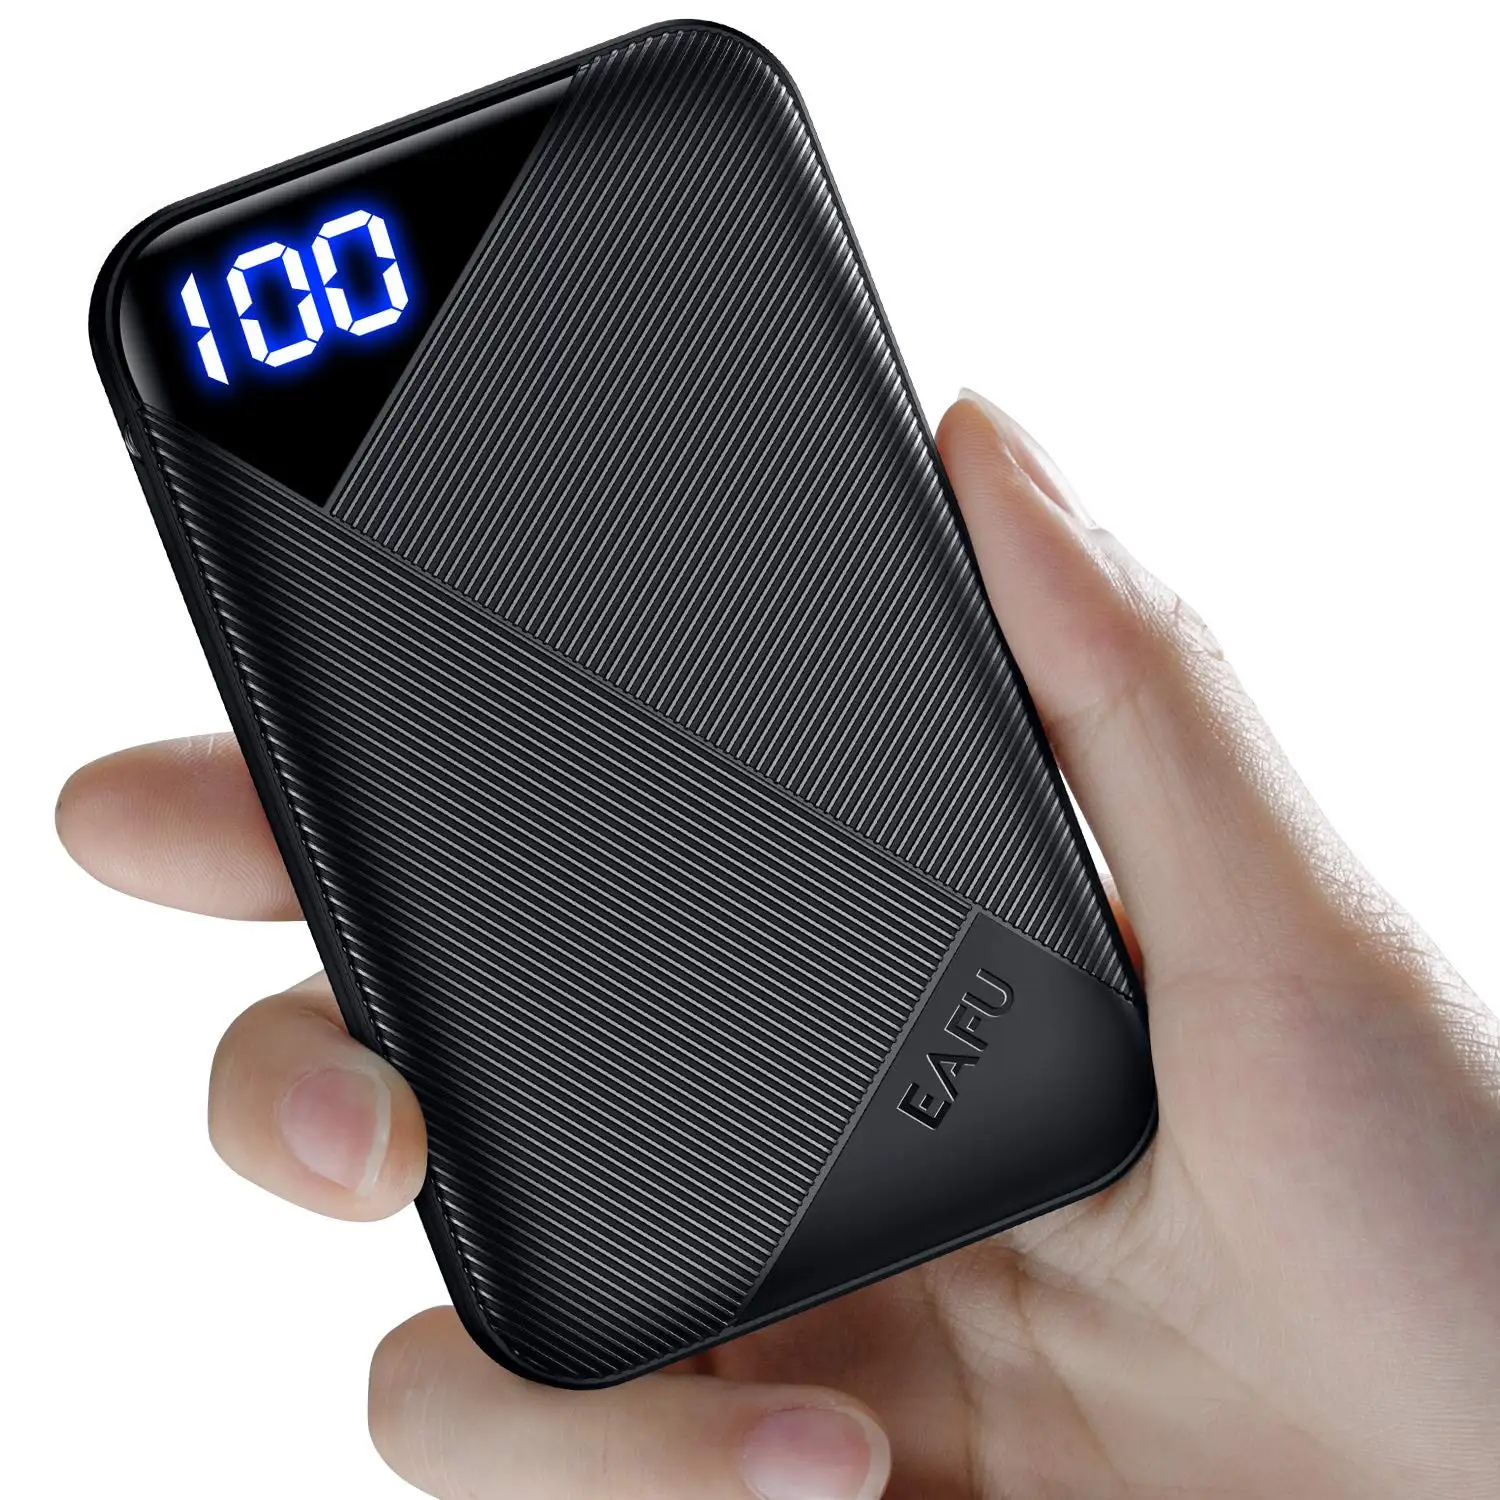 EAFU Portable Charger Pocket-size LED Display 6000mAh Power Bank with USB Type C Input Output 3A High-Speed Battery Pack